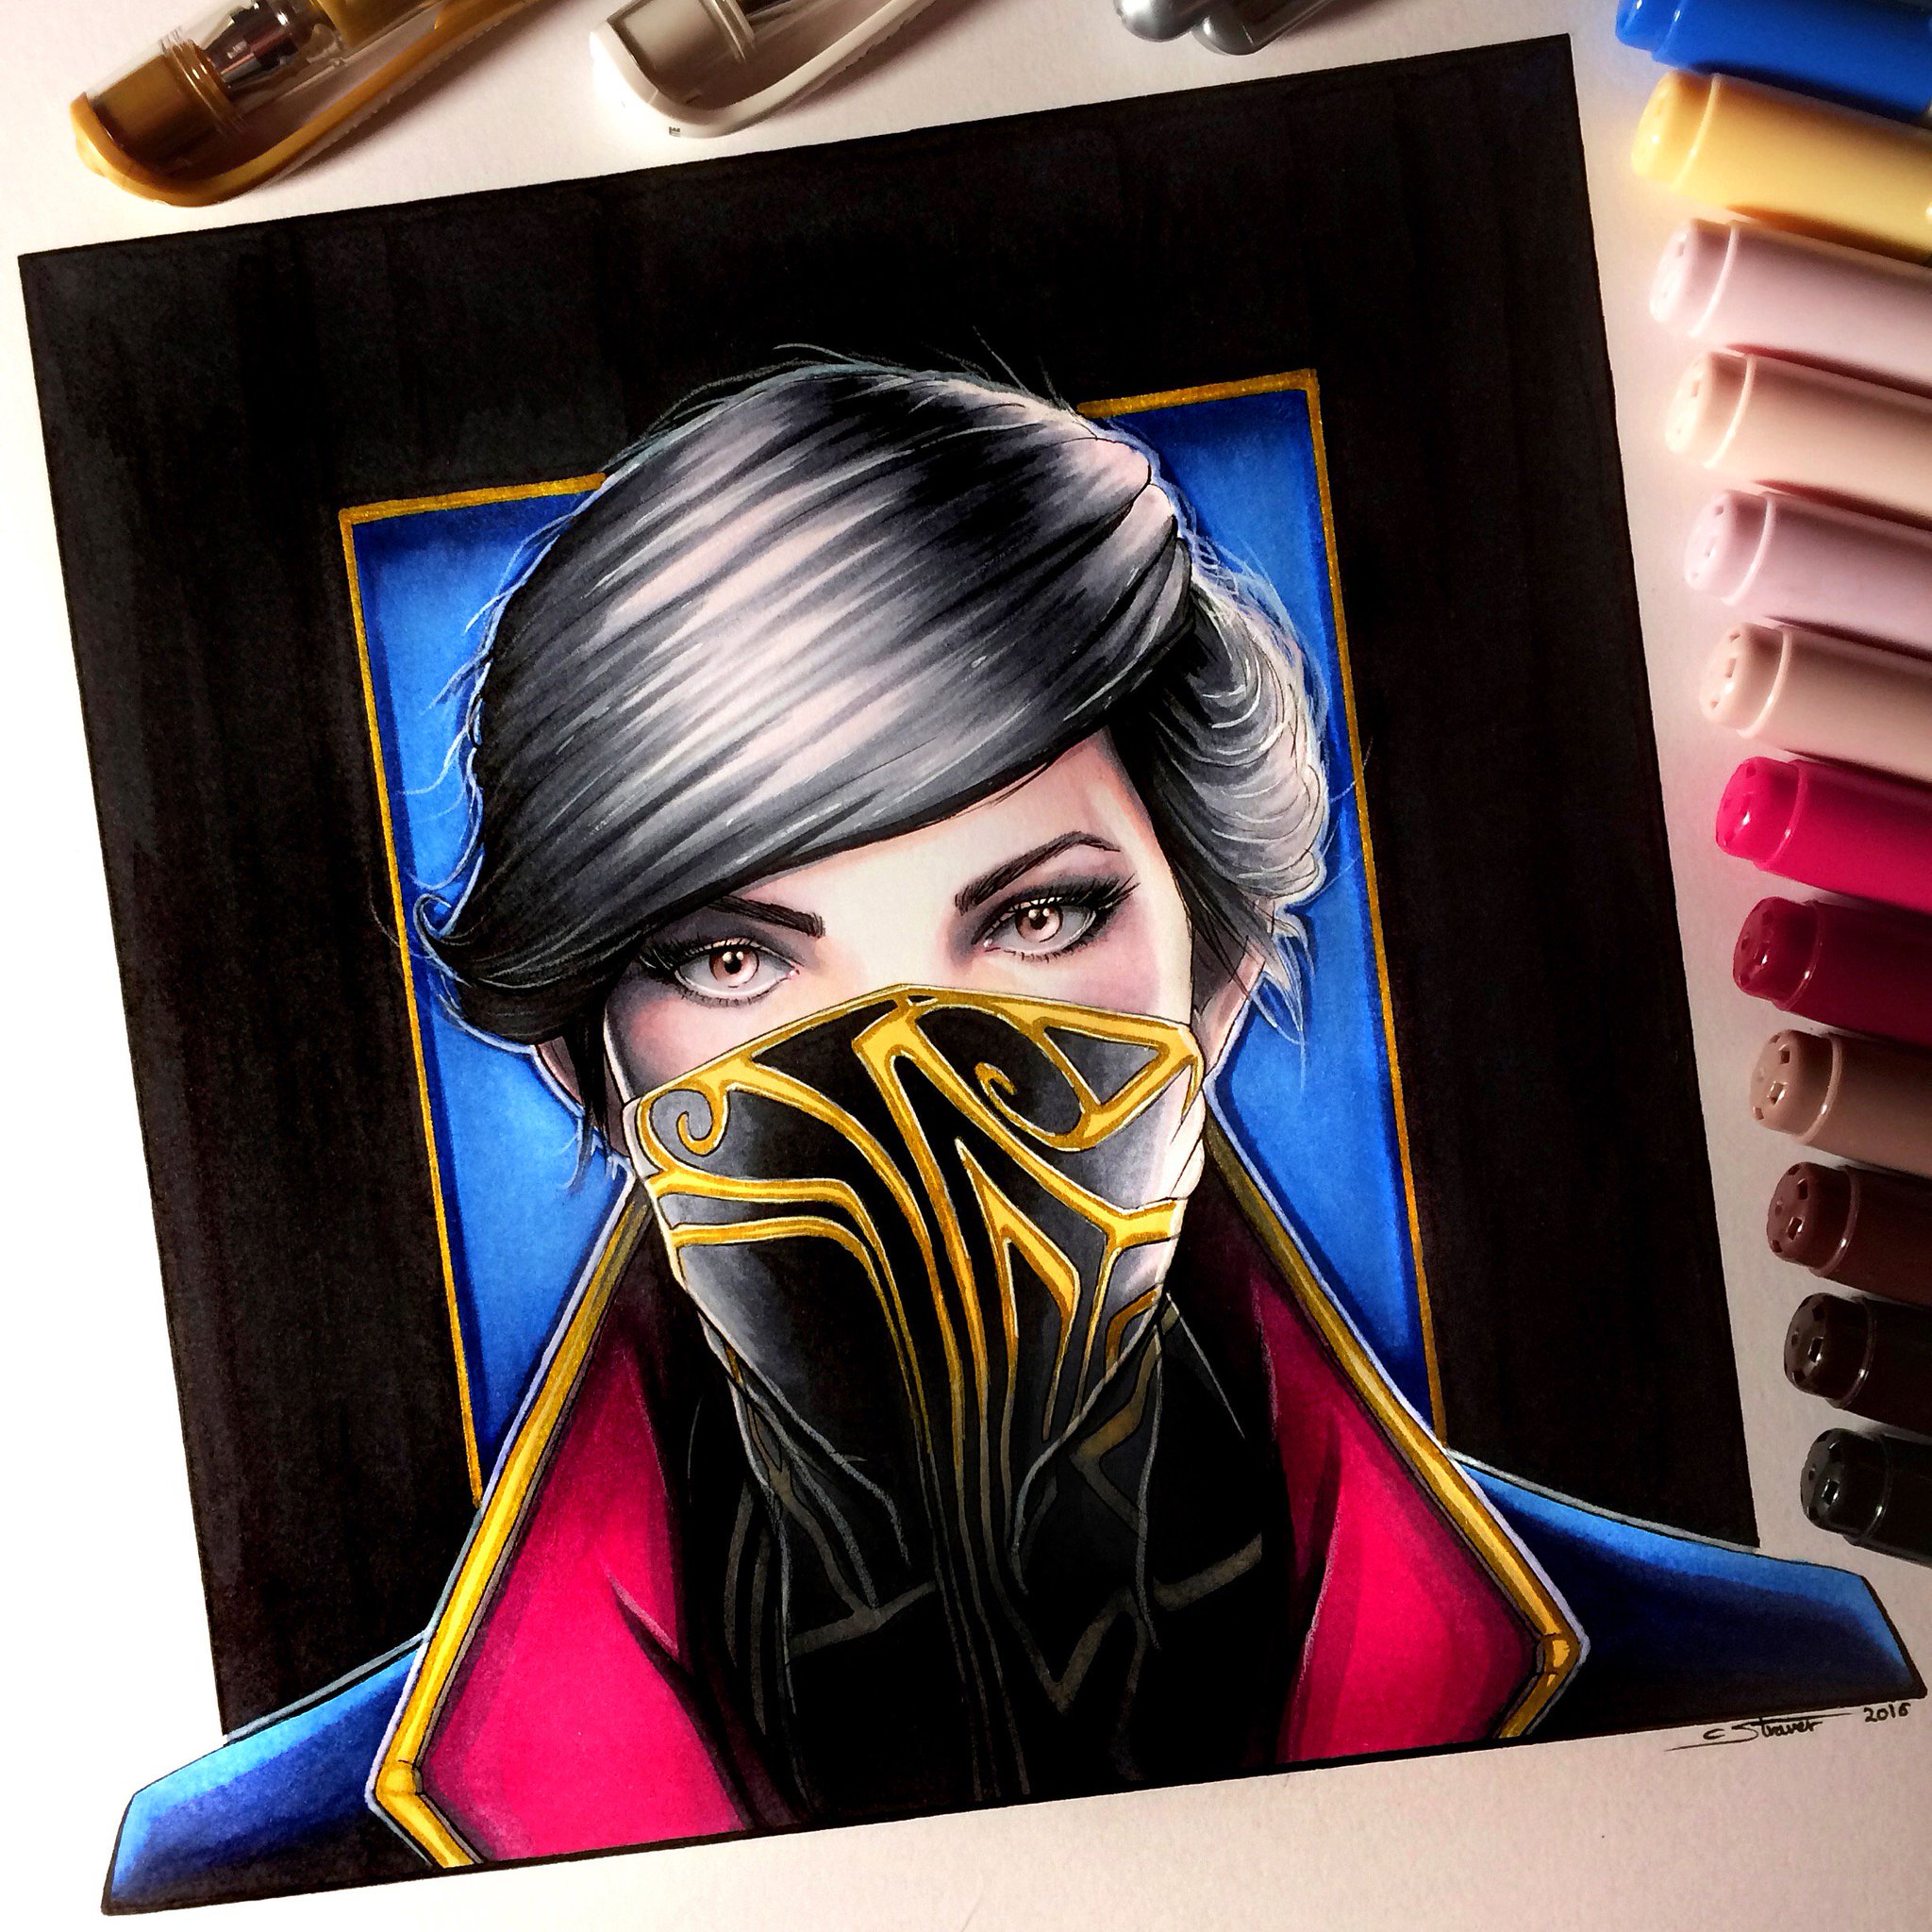 “Here's my drawing of Emily Kaldwin from #Dishonored2! 